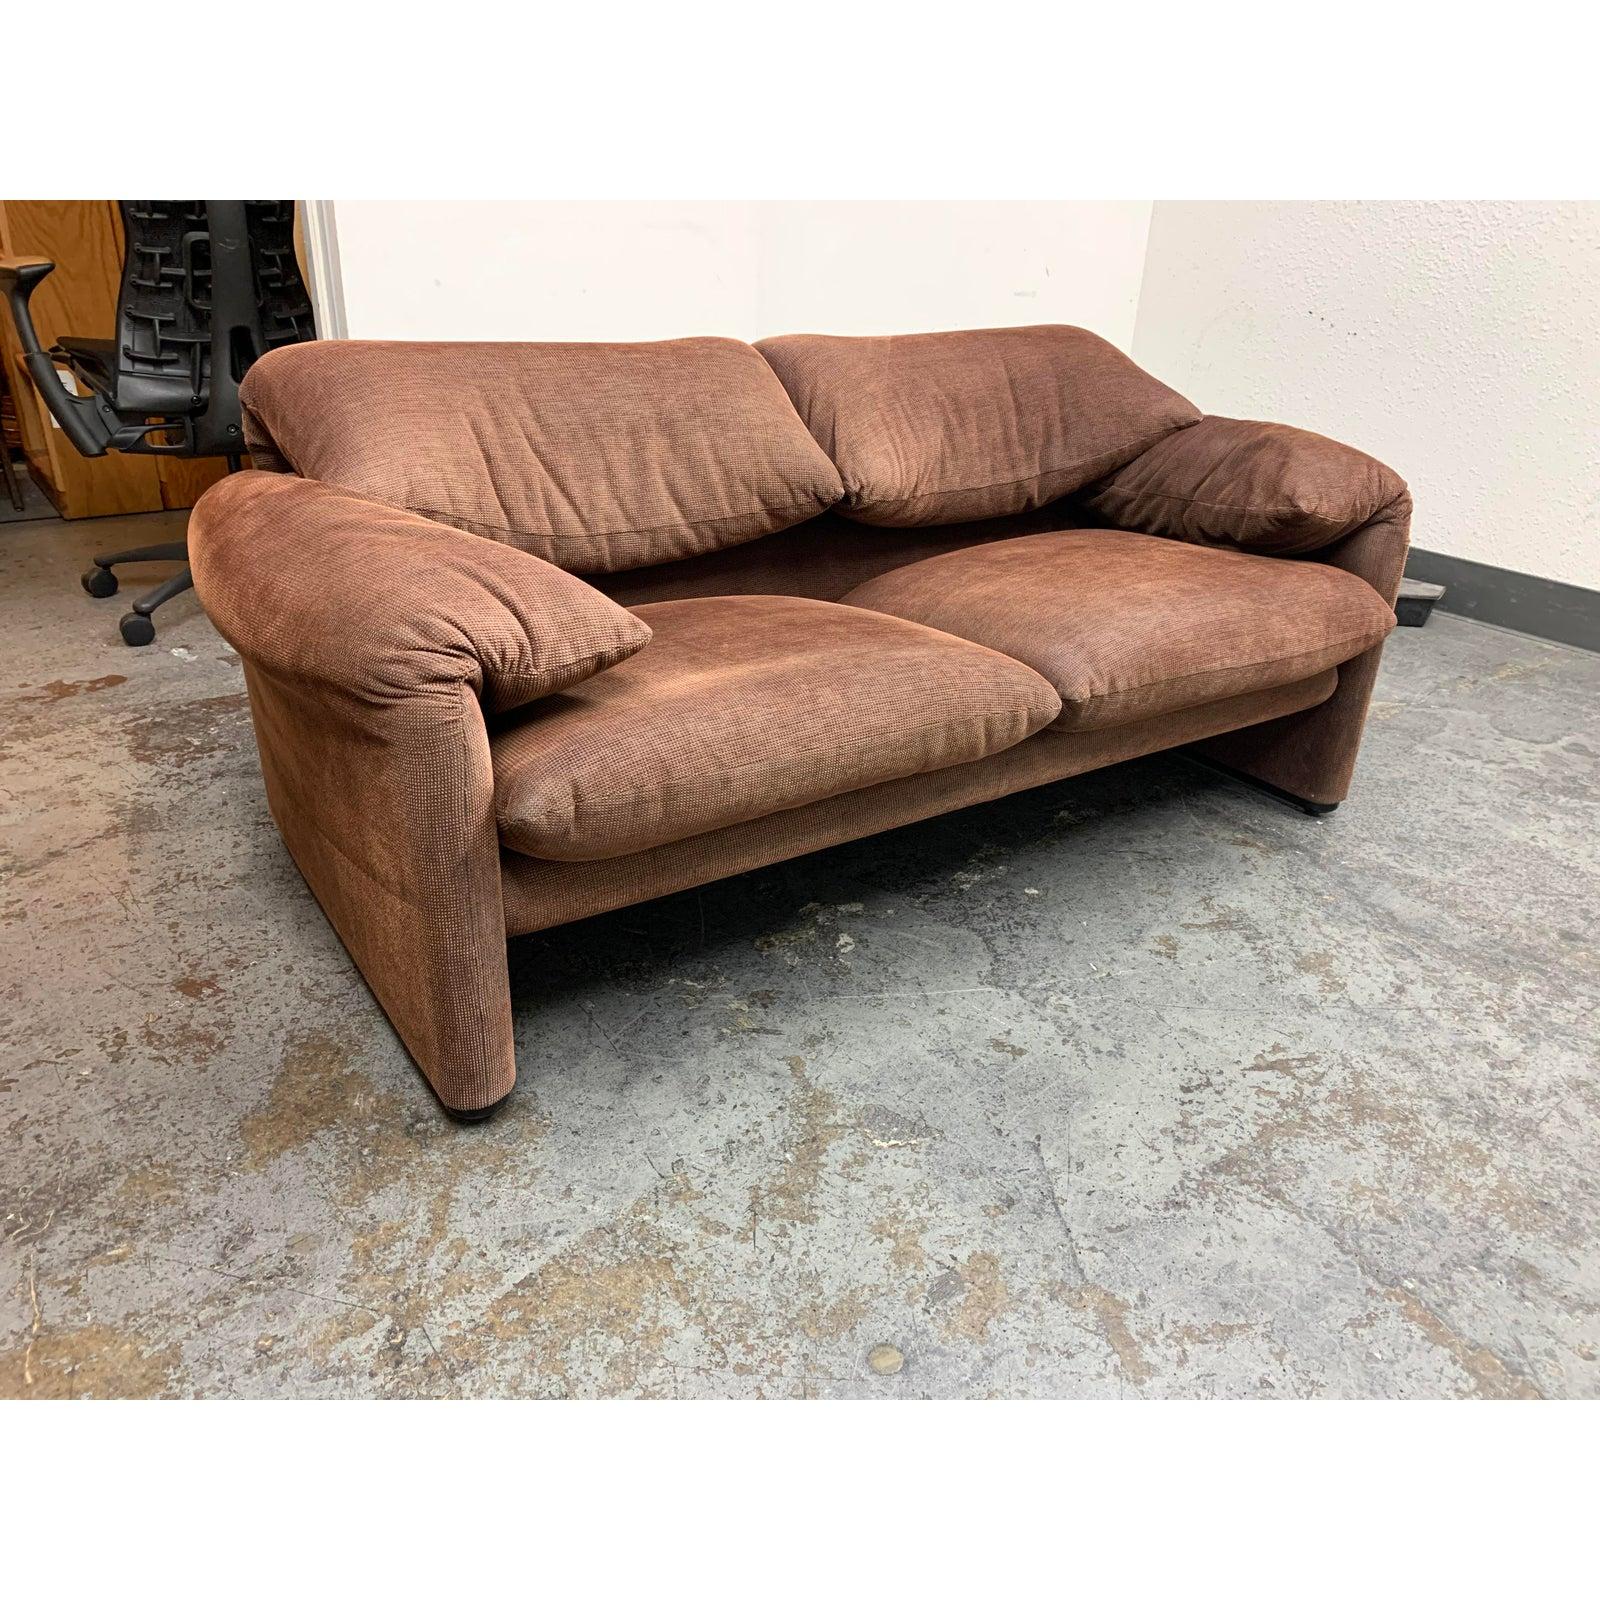 Presents a mid-20th century Maralunga loveseat by Cassina. Designed by by Vico Magistretti. Postmodern vibe combines top of the line Italian engineering for lounge worthy loveseat. Adjustable back and arms easily bend within upholstery. Fabric has